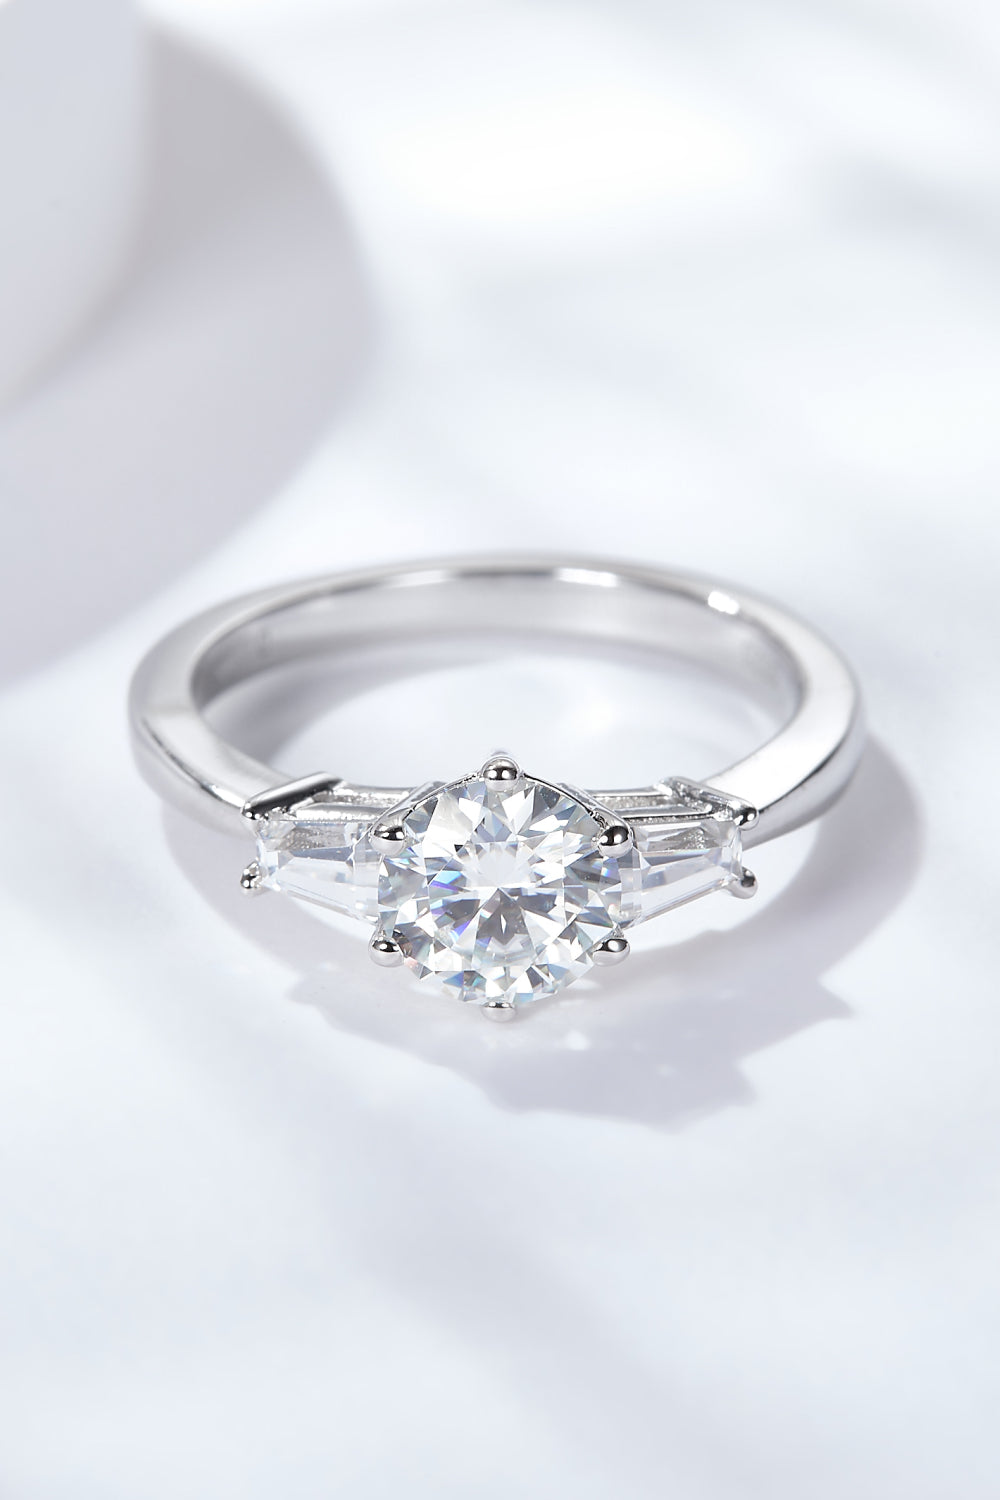 Loyal Love 1 Carat Round Brilliant Cut Moissanite Ring (Platinum Over Pure Sterling Silver)